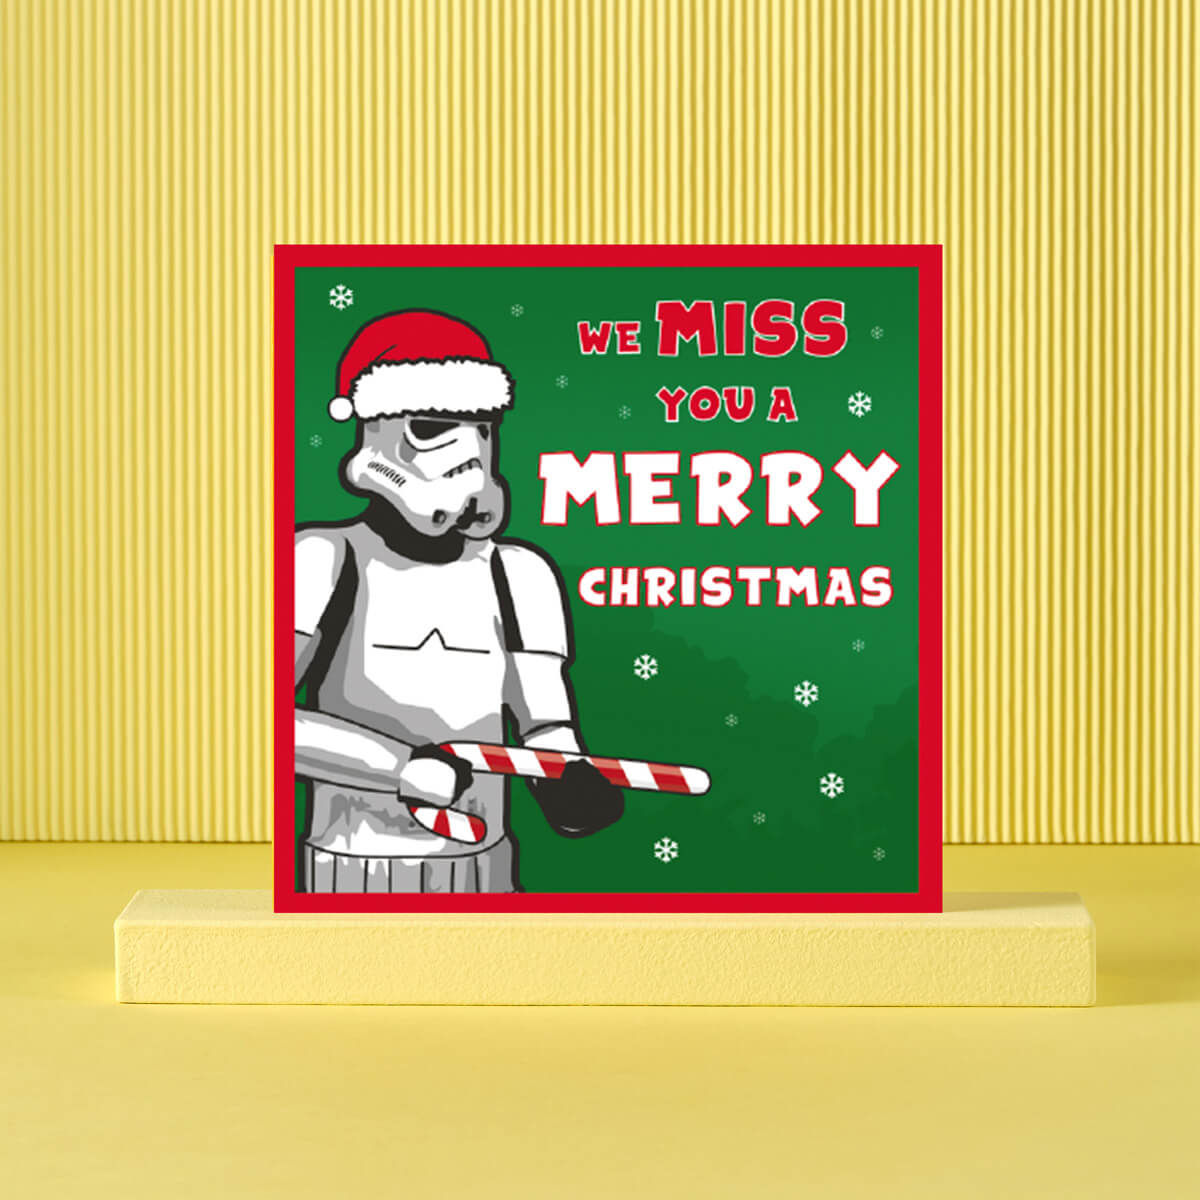 Original Stormtrooper Christmas Card Funny - Card reads'We MISS you a Merry Christmas'